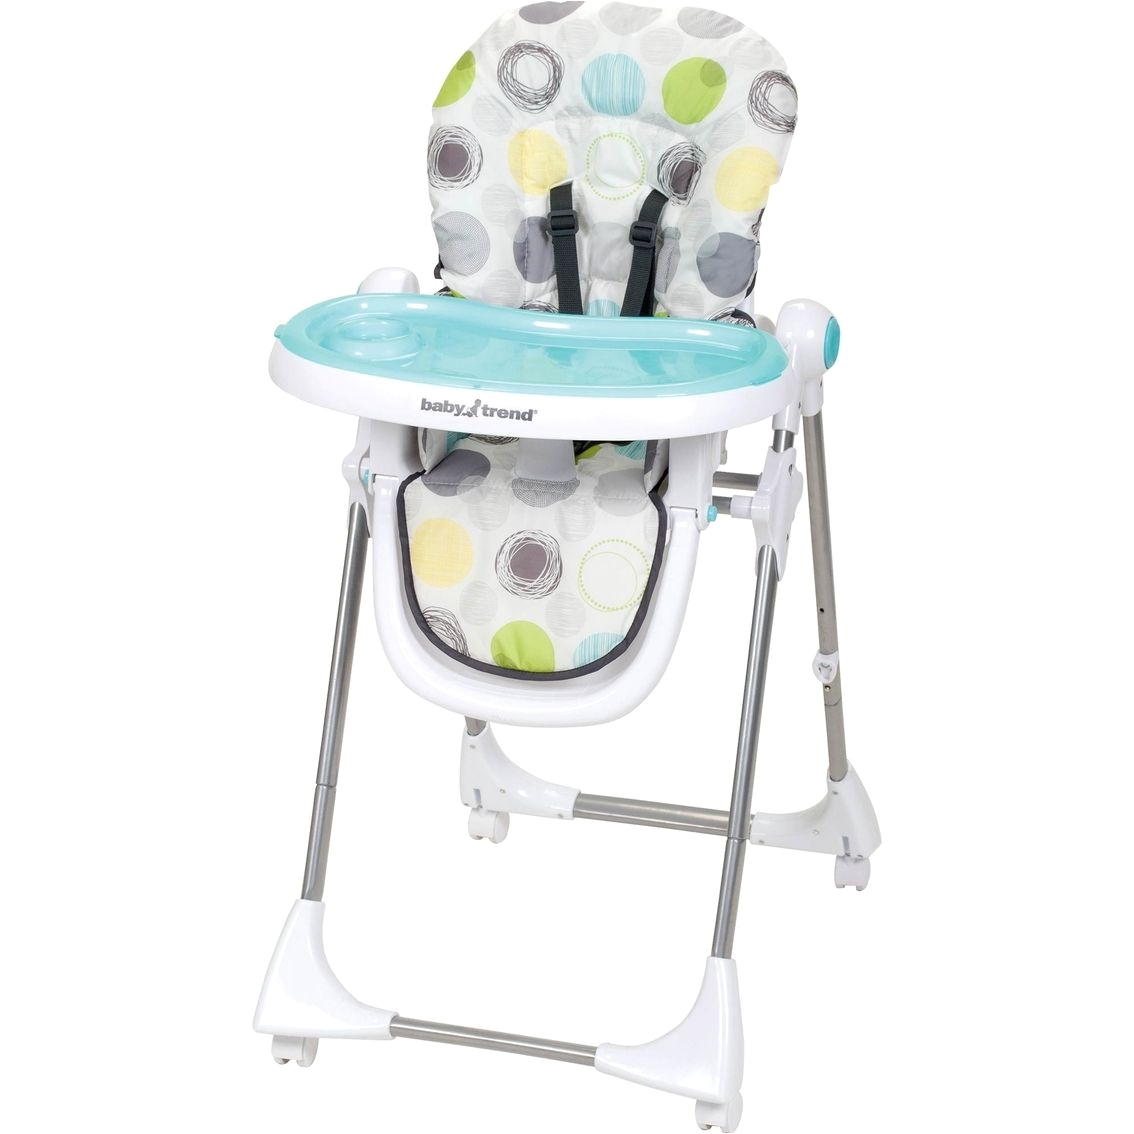 Fisher Price Ez Clean High Chair Cover the New aspen High Chair Offers Style Safety and Comfort the